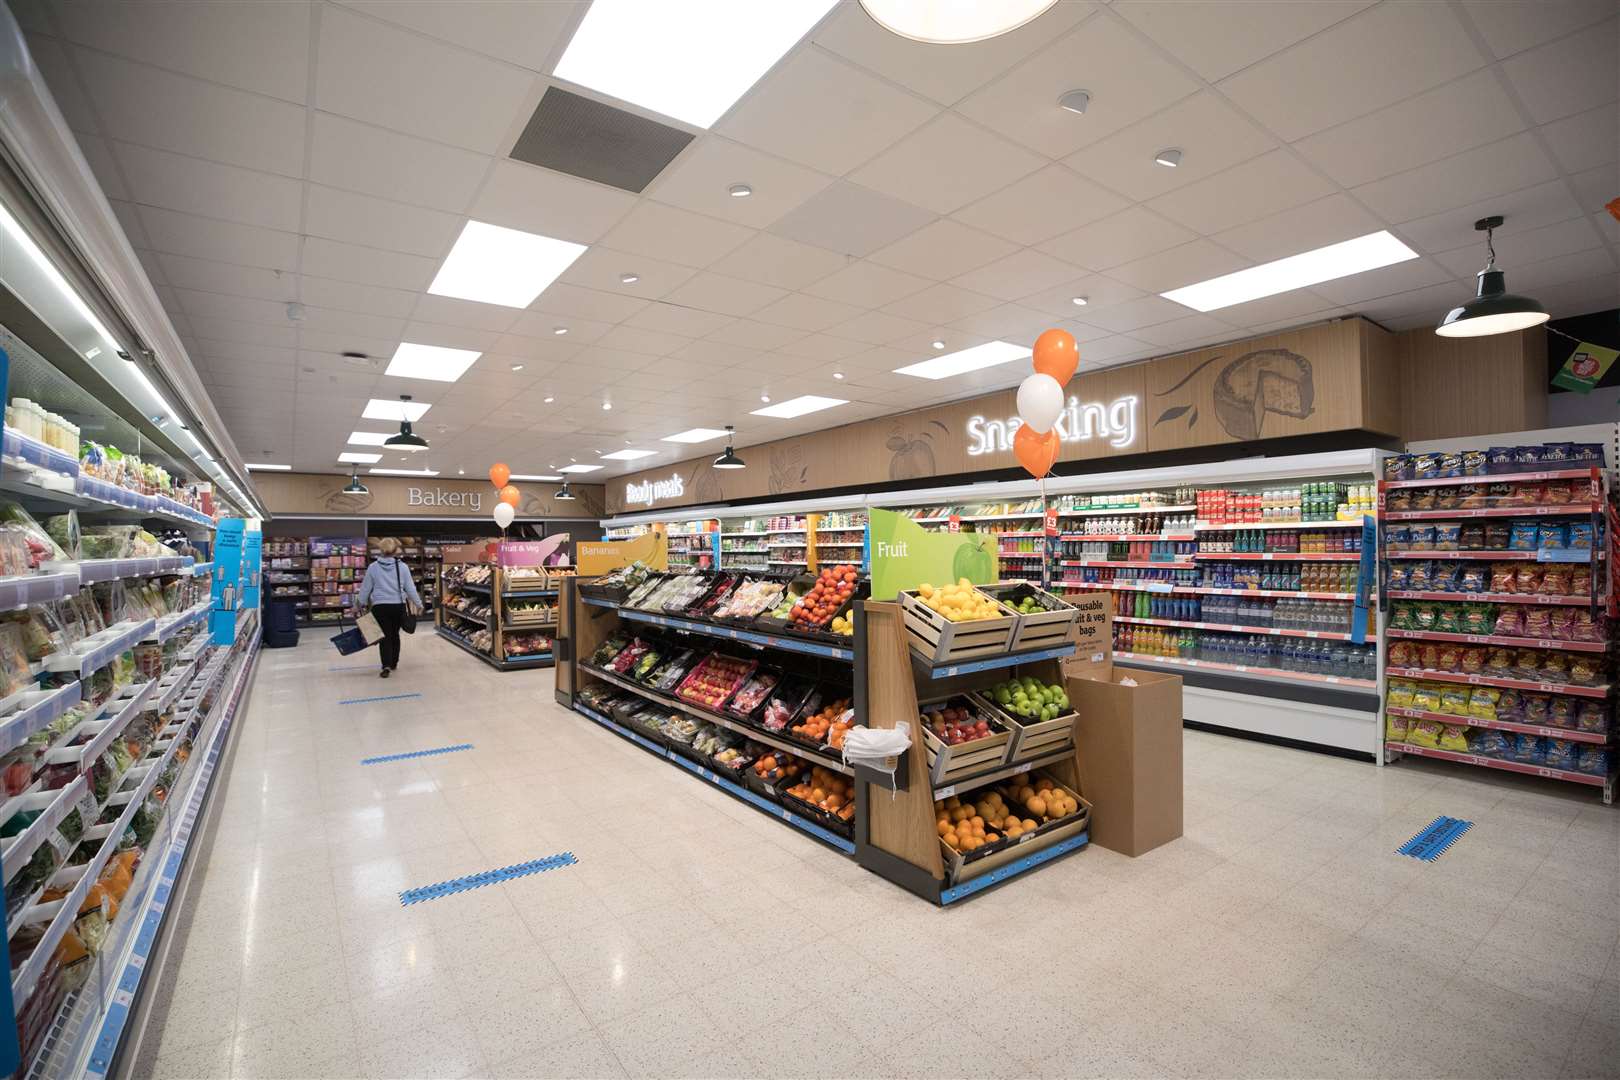 The store is similar to the Melbourne, Derbyshire, branch (pictured) which has been refurbished. Picture: Sainsbury's